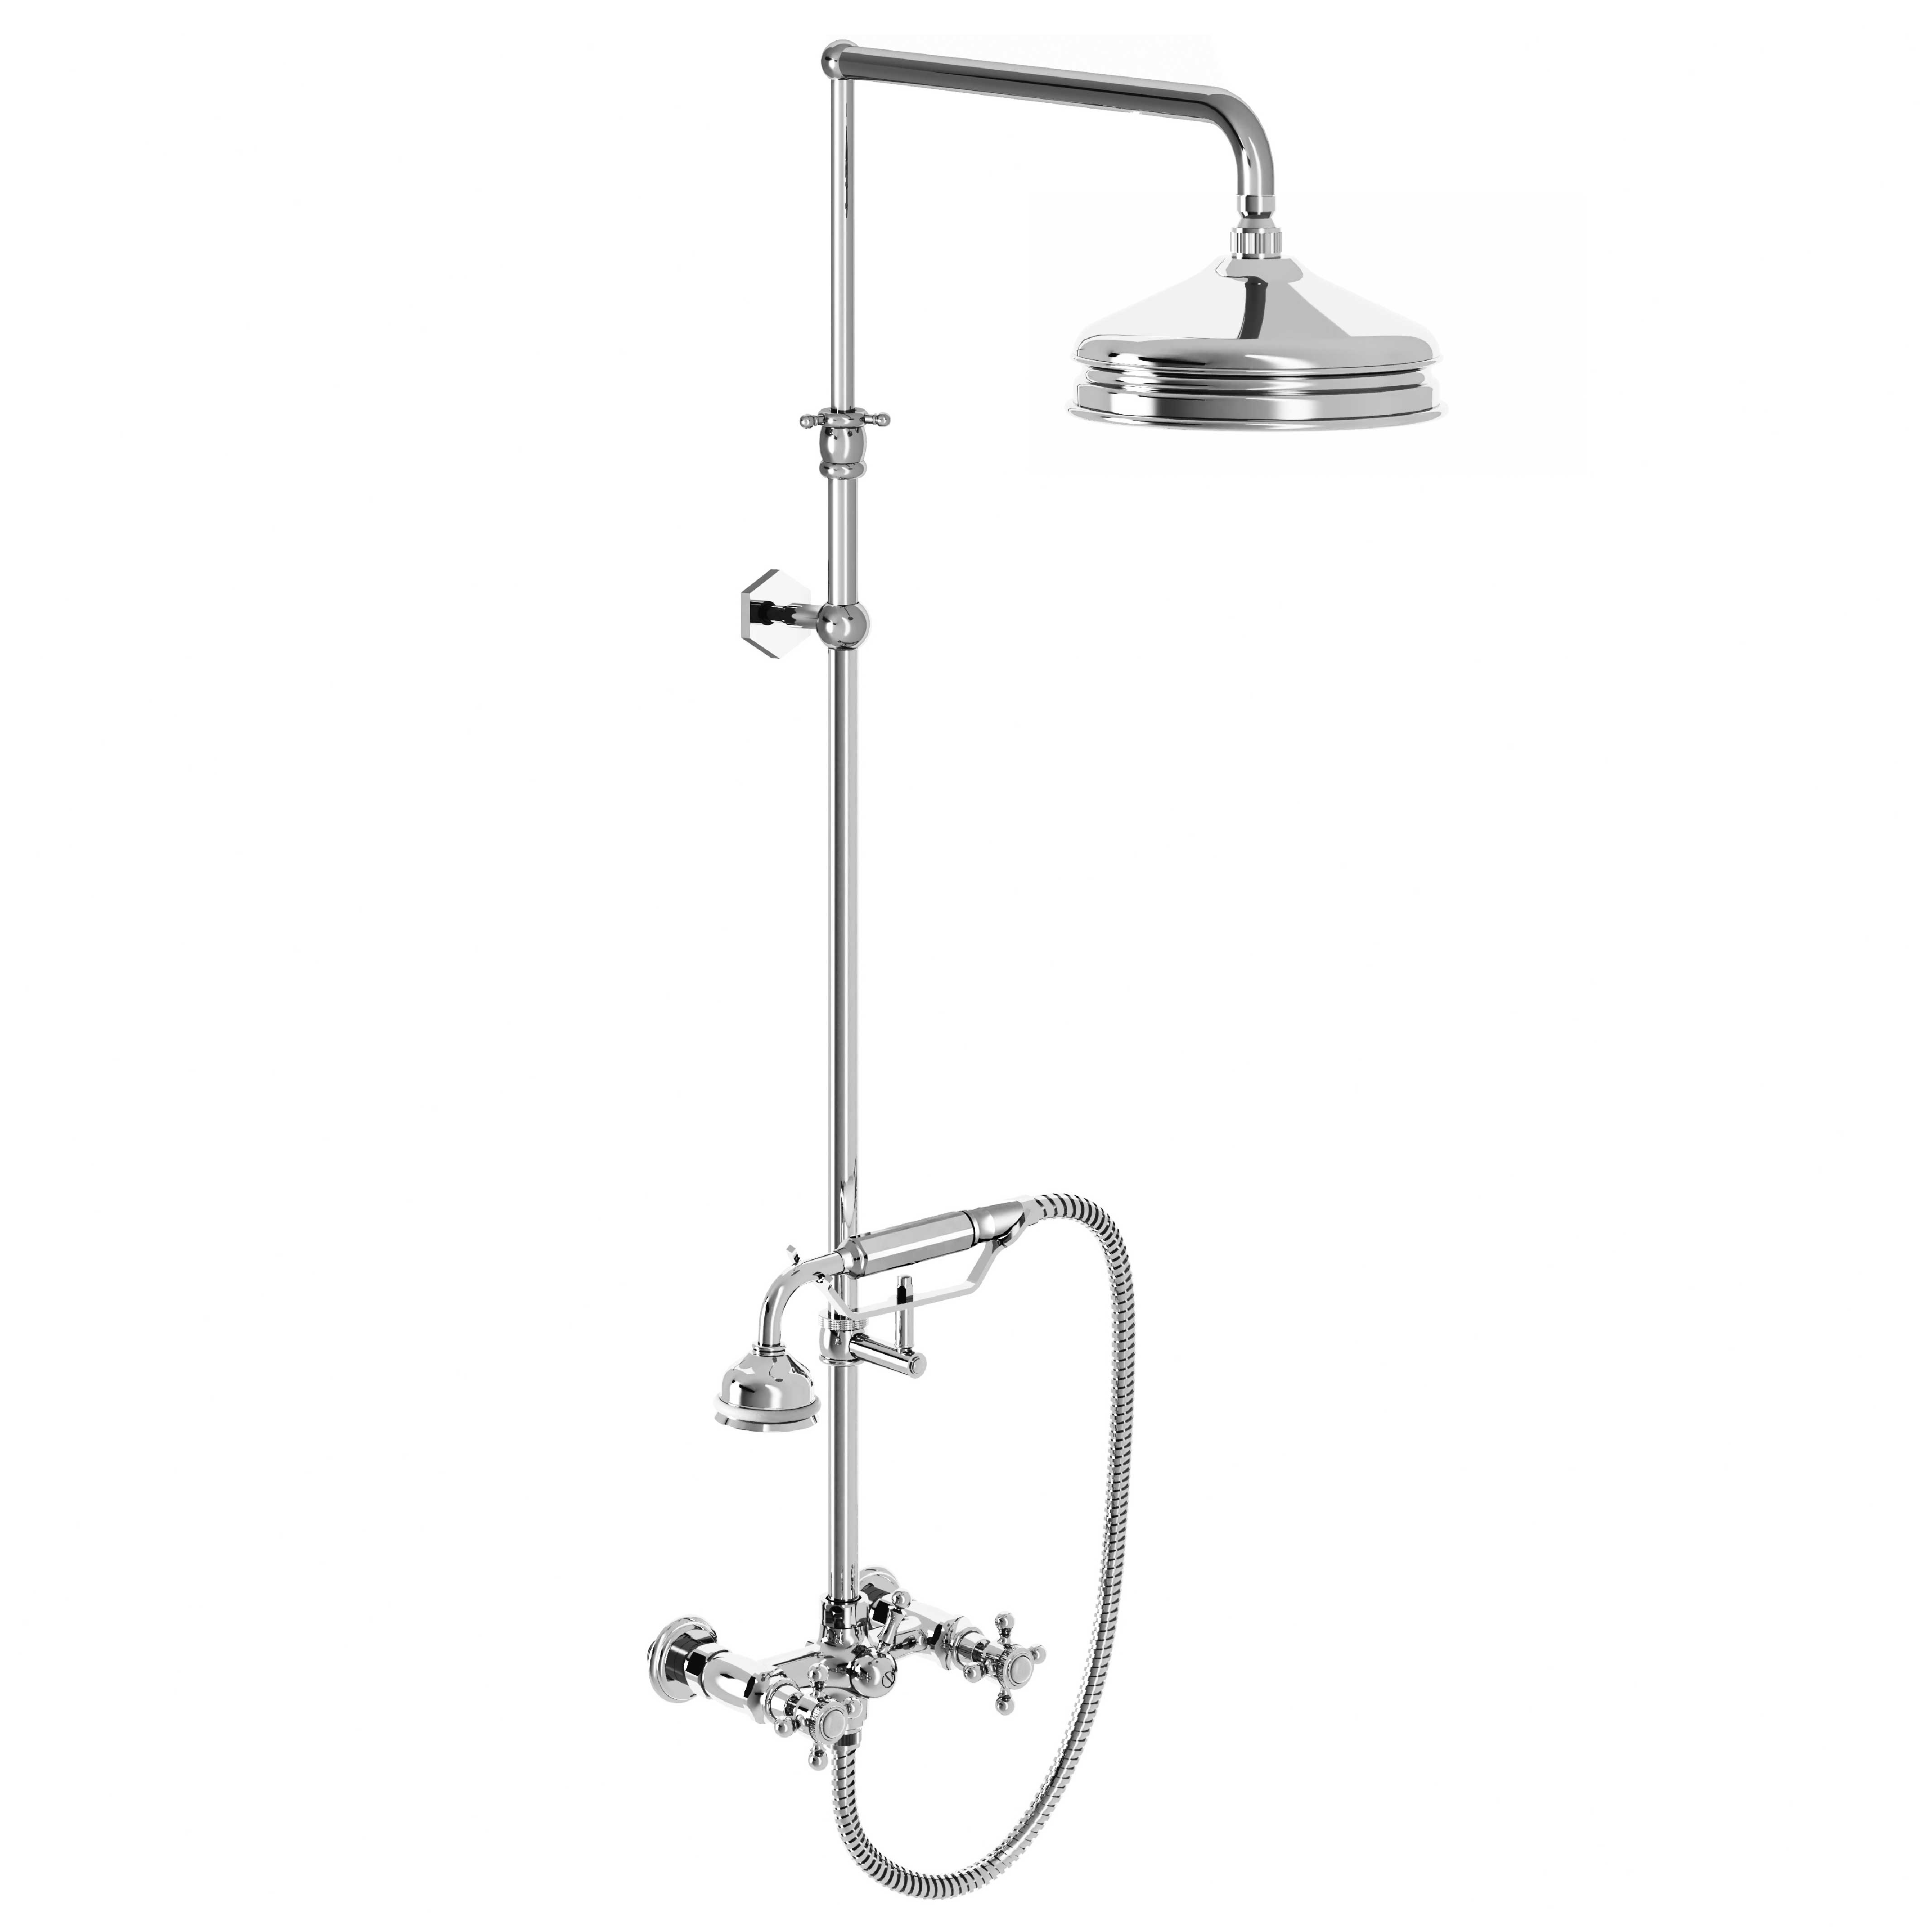 M30-2204 Shower mixer with column, anti-scaling